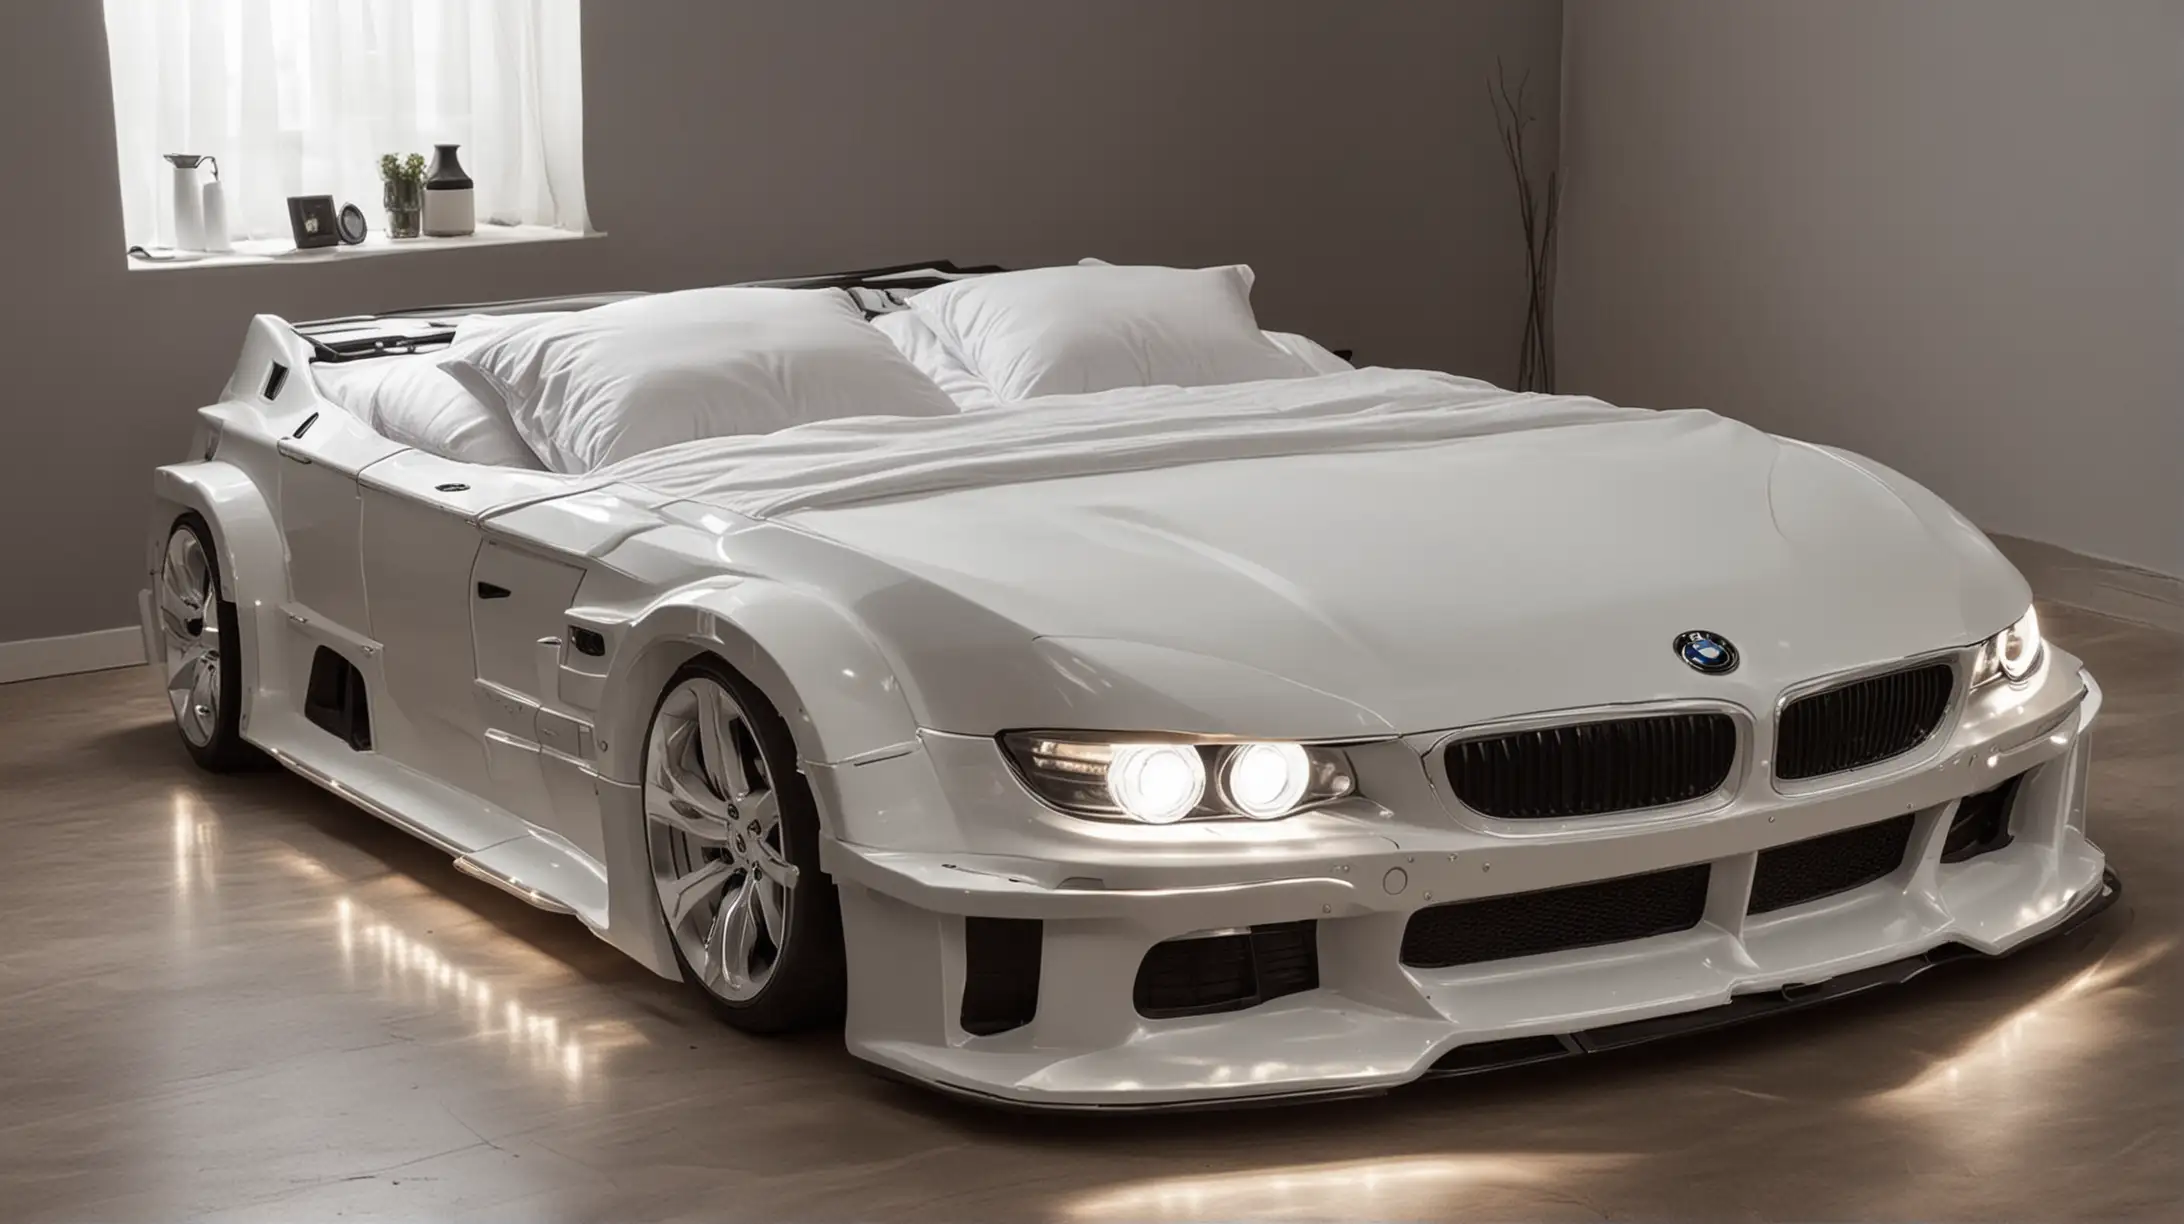 Double bed in the form of a BMW car with headlights on